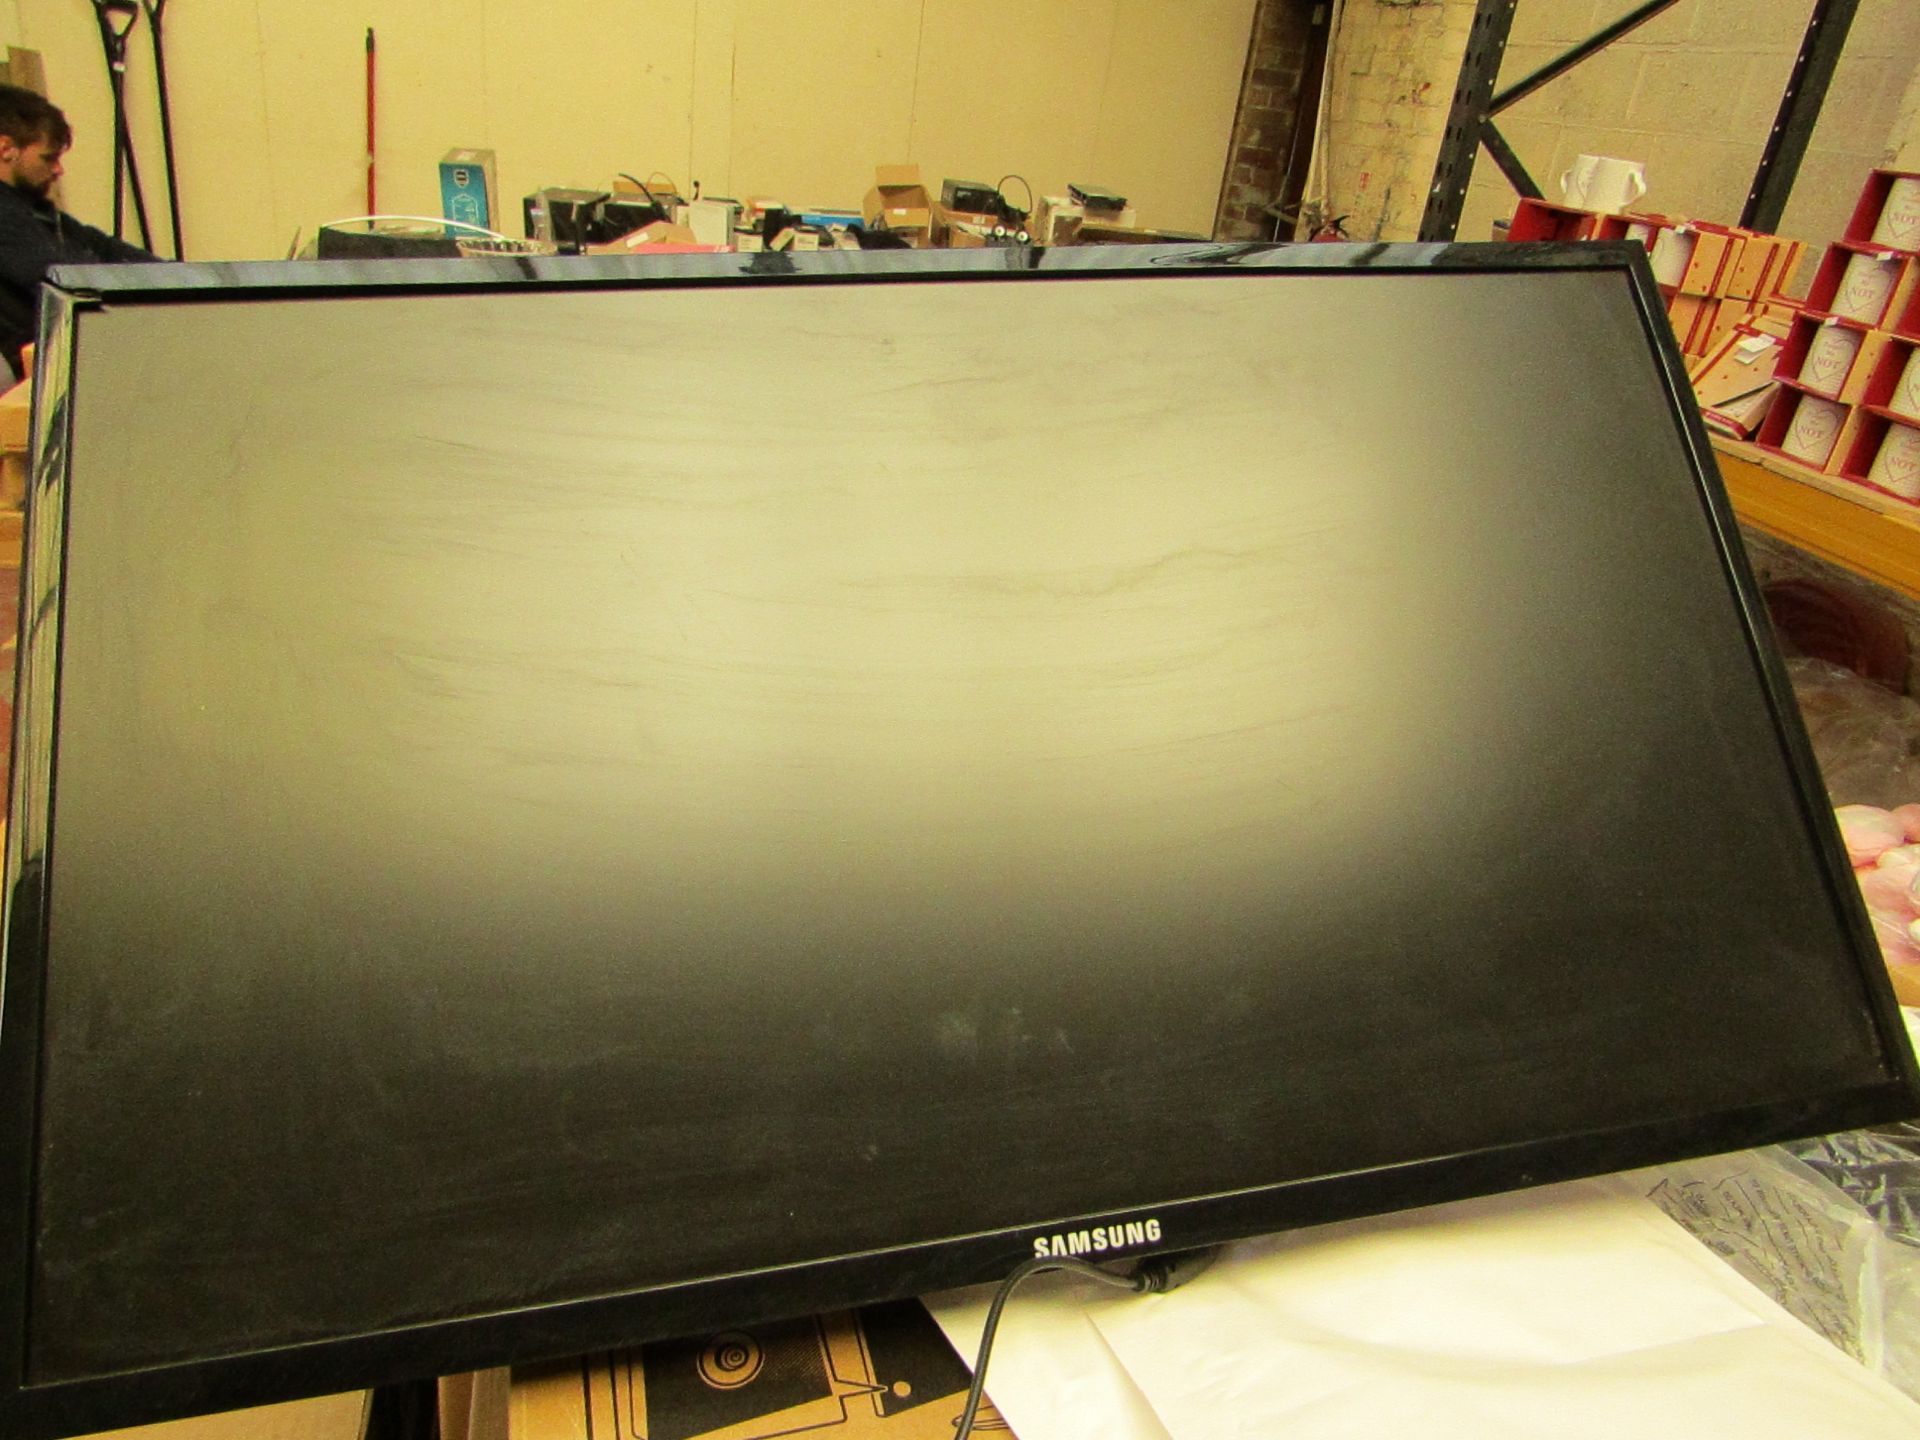 Samsung S24F350FHU 24" LED monitor, tested working and only has cosmetic damage to the frame which